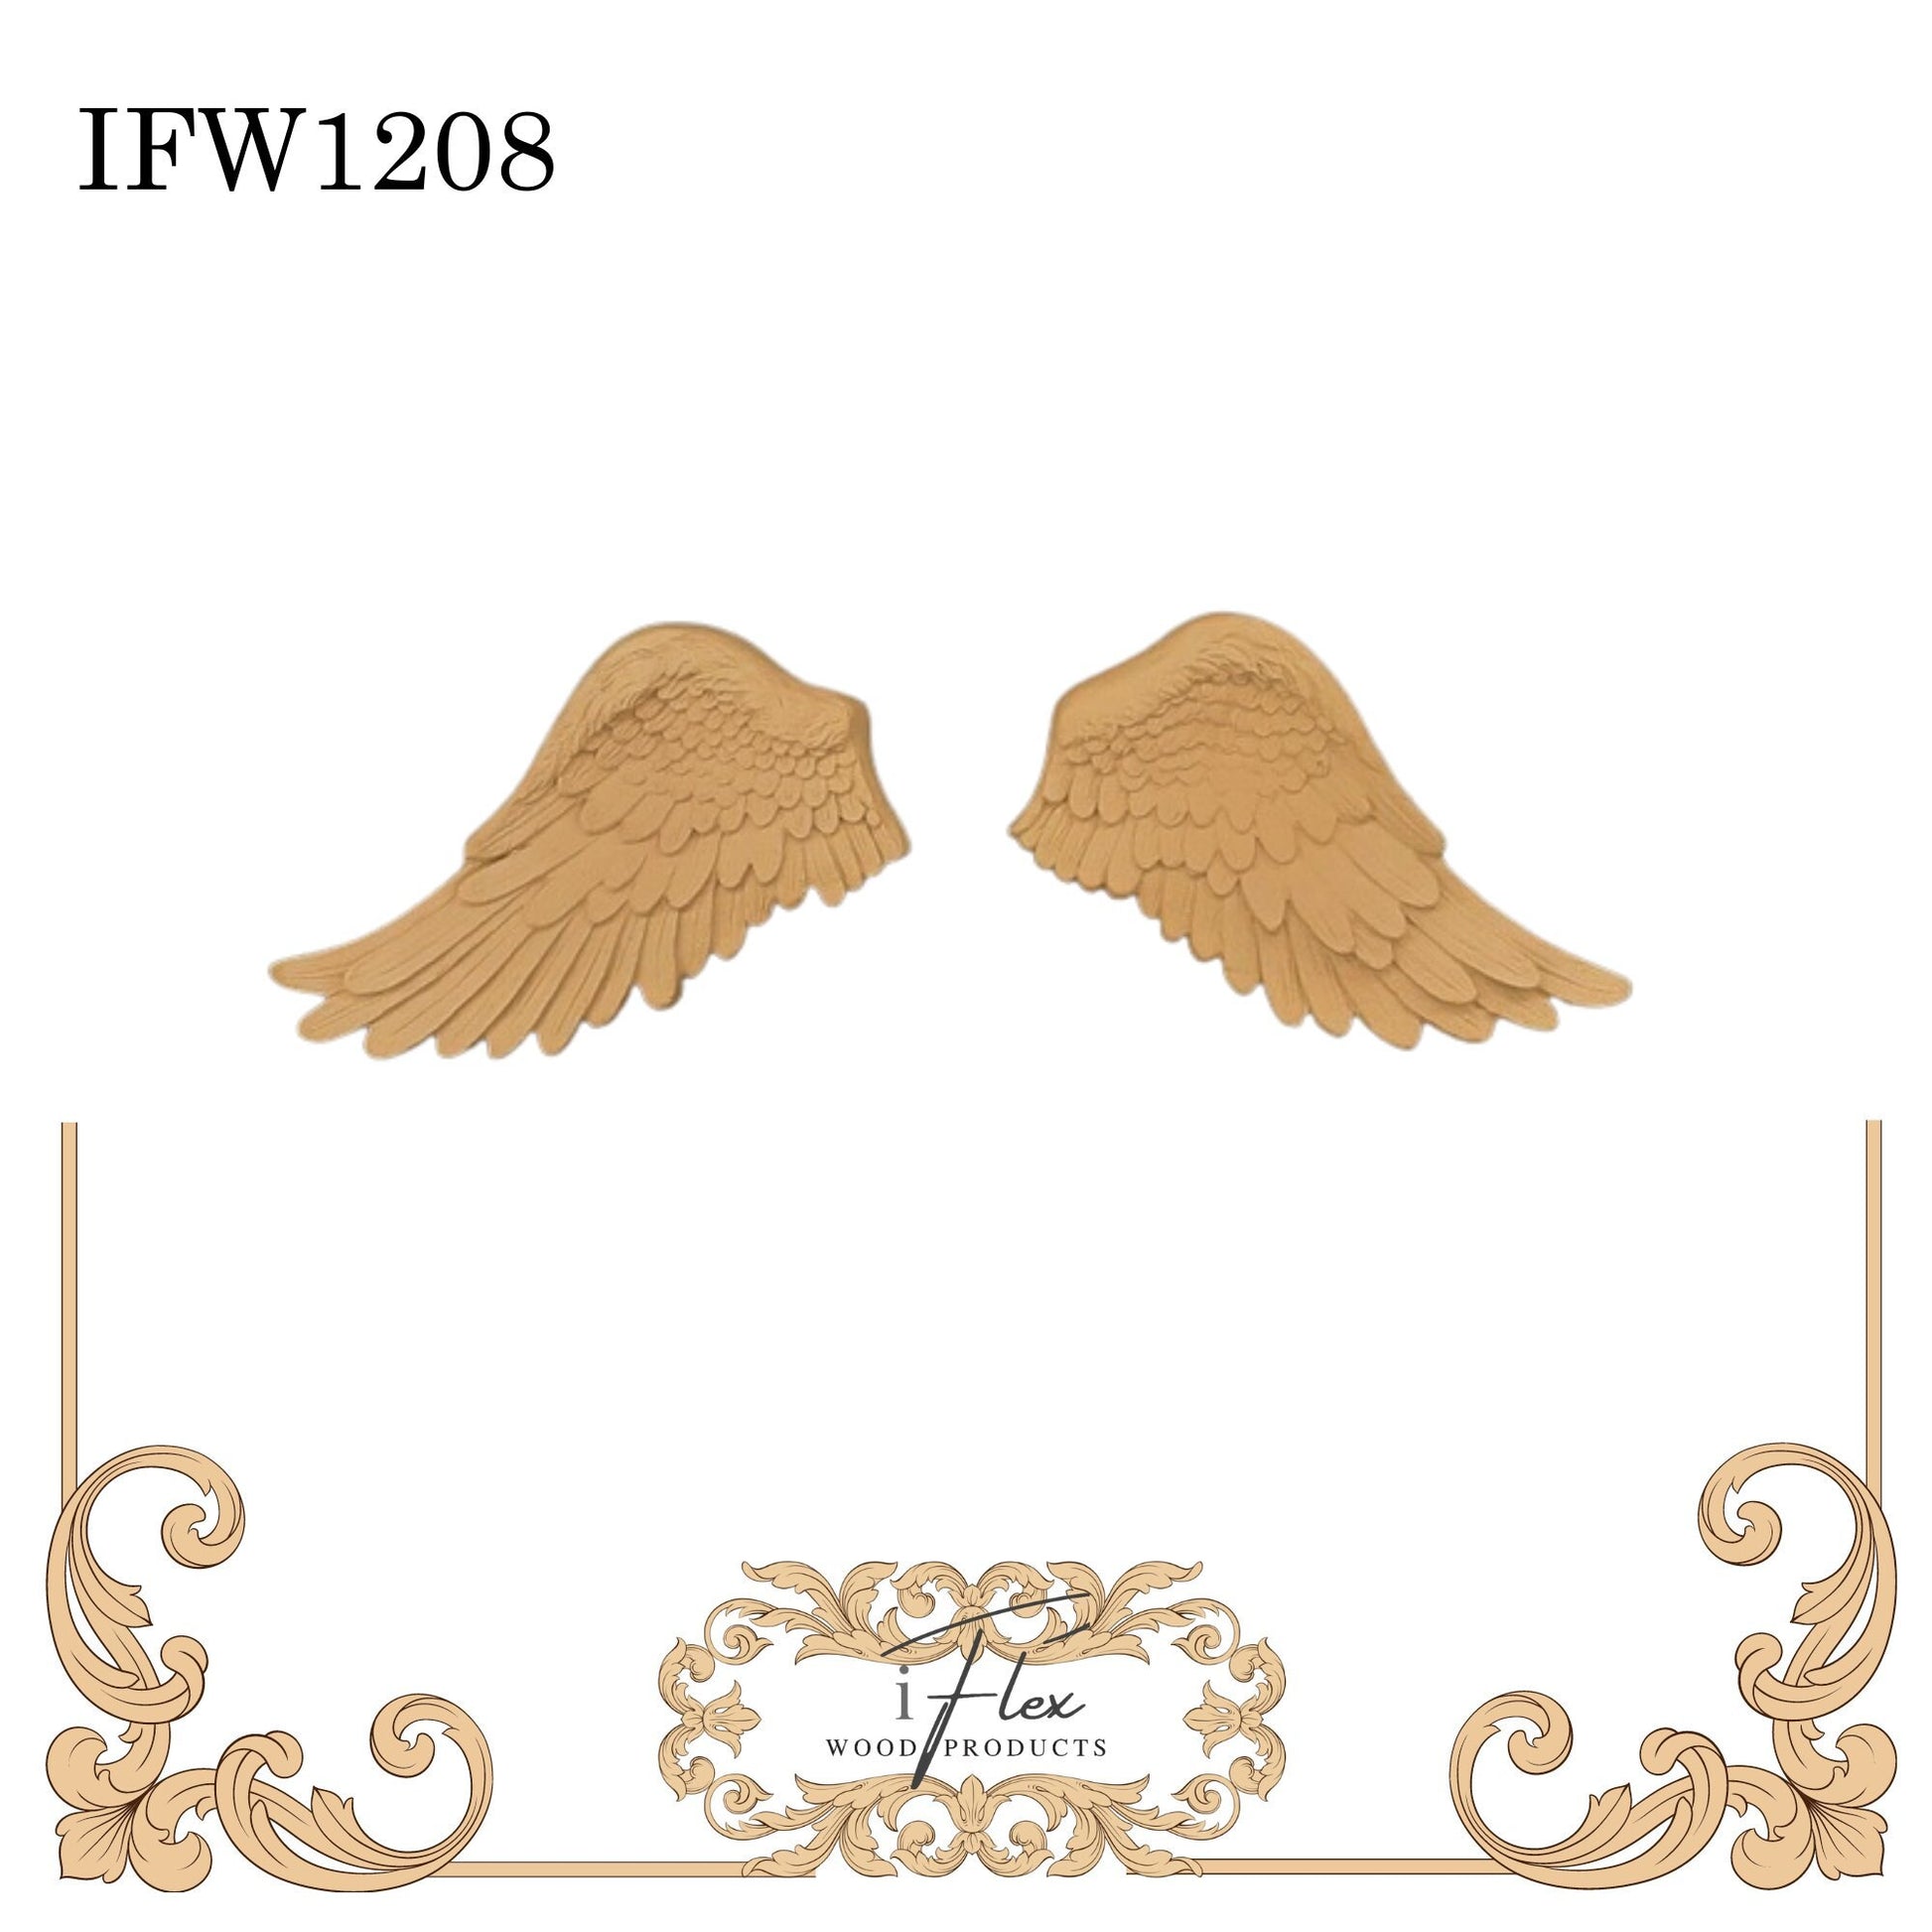 IFW 1208 iFlex Wood Products, bendable mouldings, flexible, wooden appliques, wings